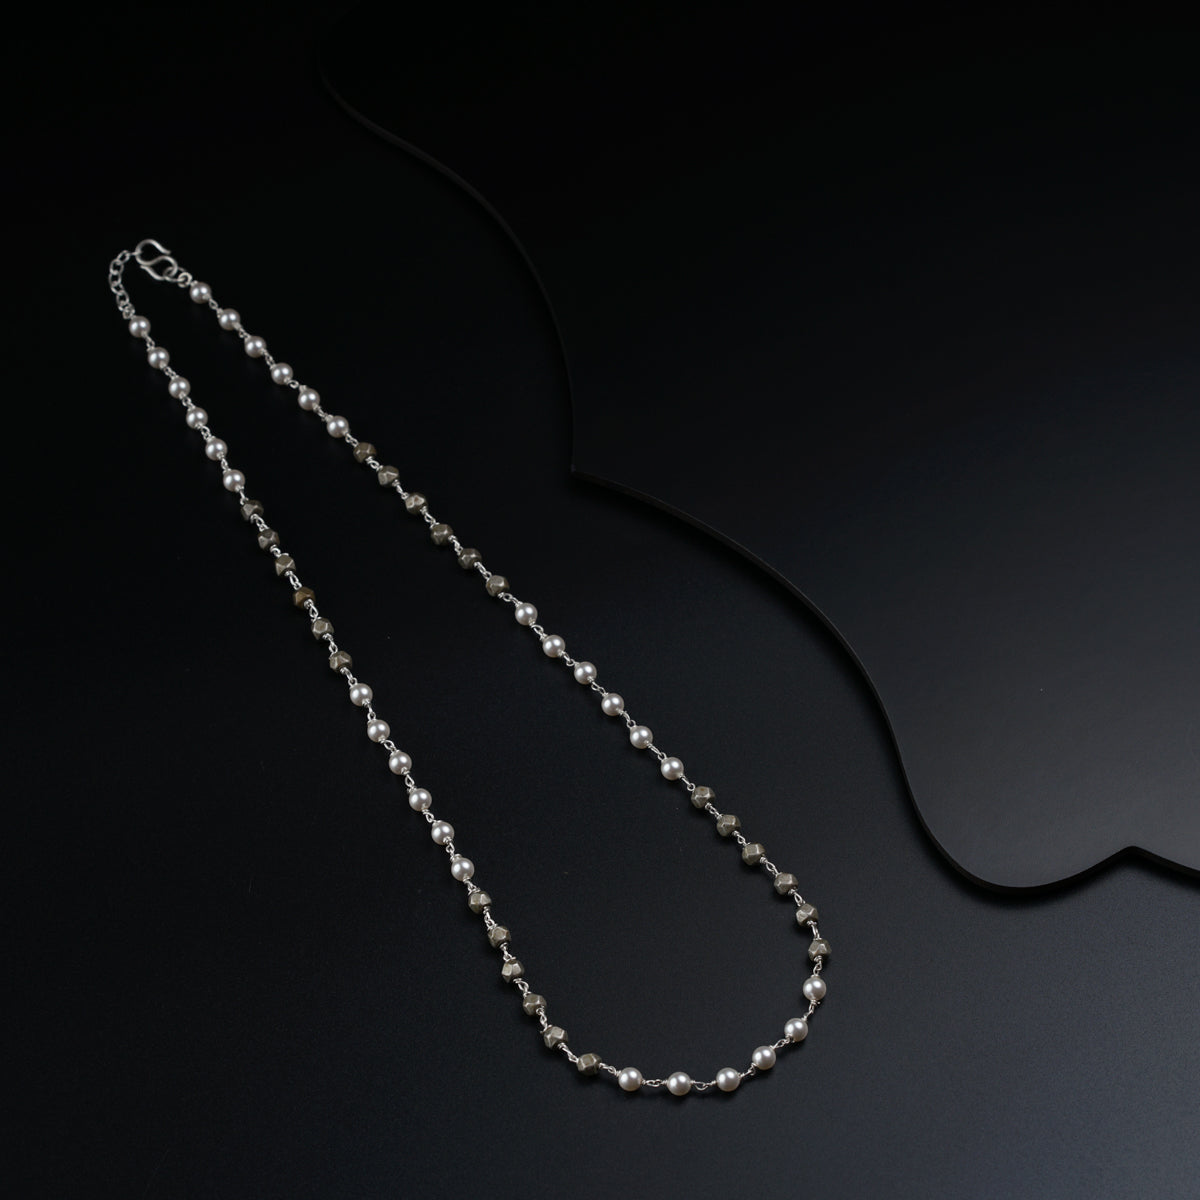 a long silver chain with a clasp on a black background